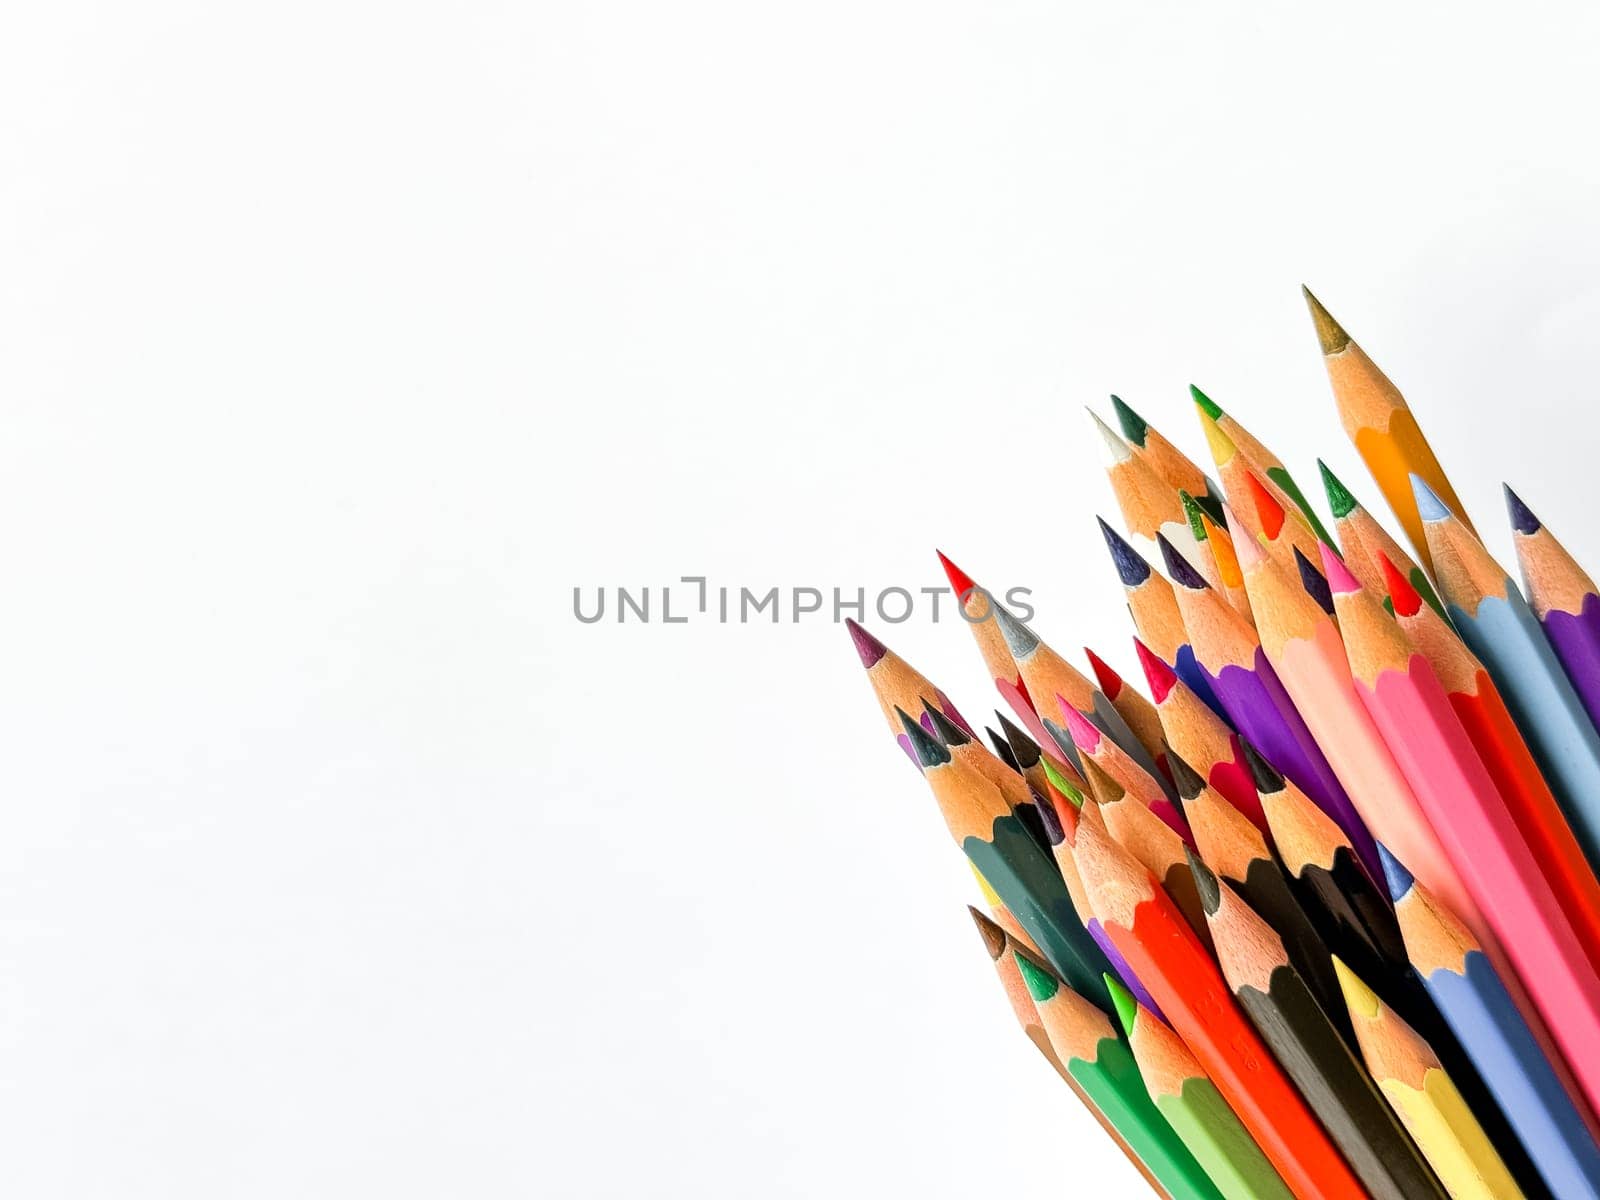 Assorted sharpened colorful pencils pointing up on white background with copy space for text. Concept of artistic or school supplies for design, teaching and educational purposes. by Lunnica